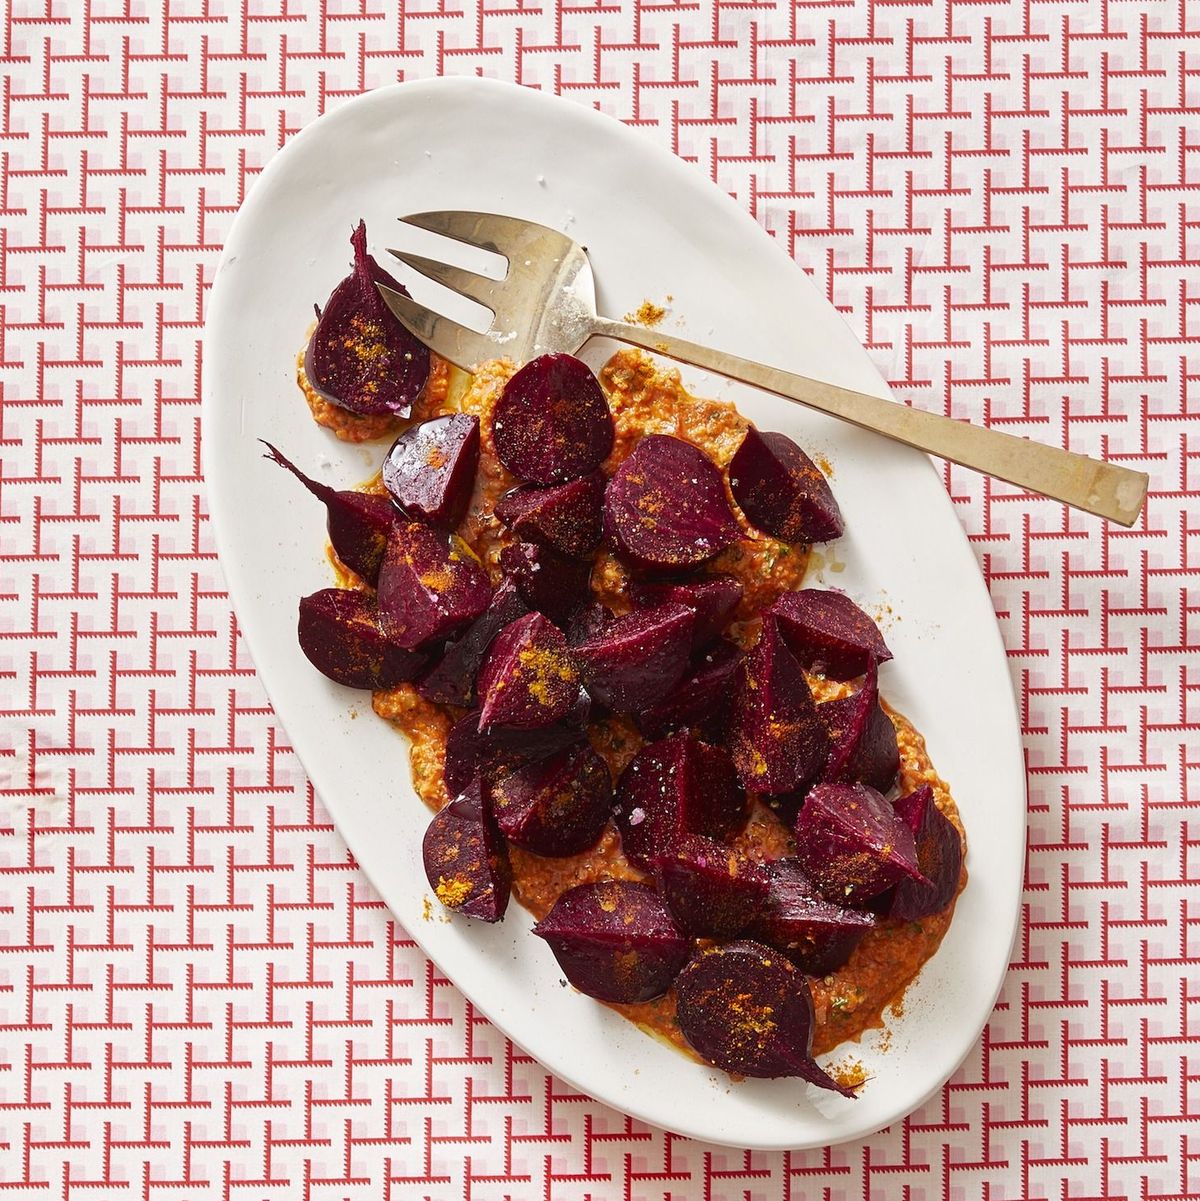 Turmeric-Roasted Beets with Orange Bell Pepper Romesco